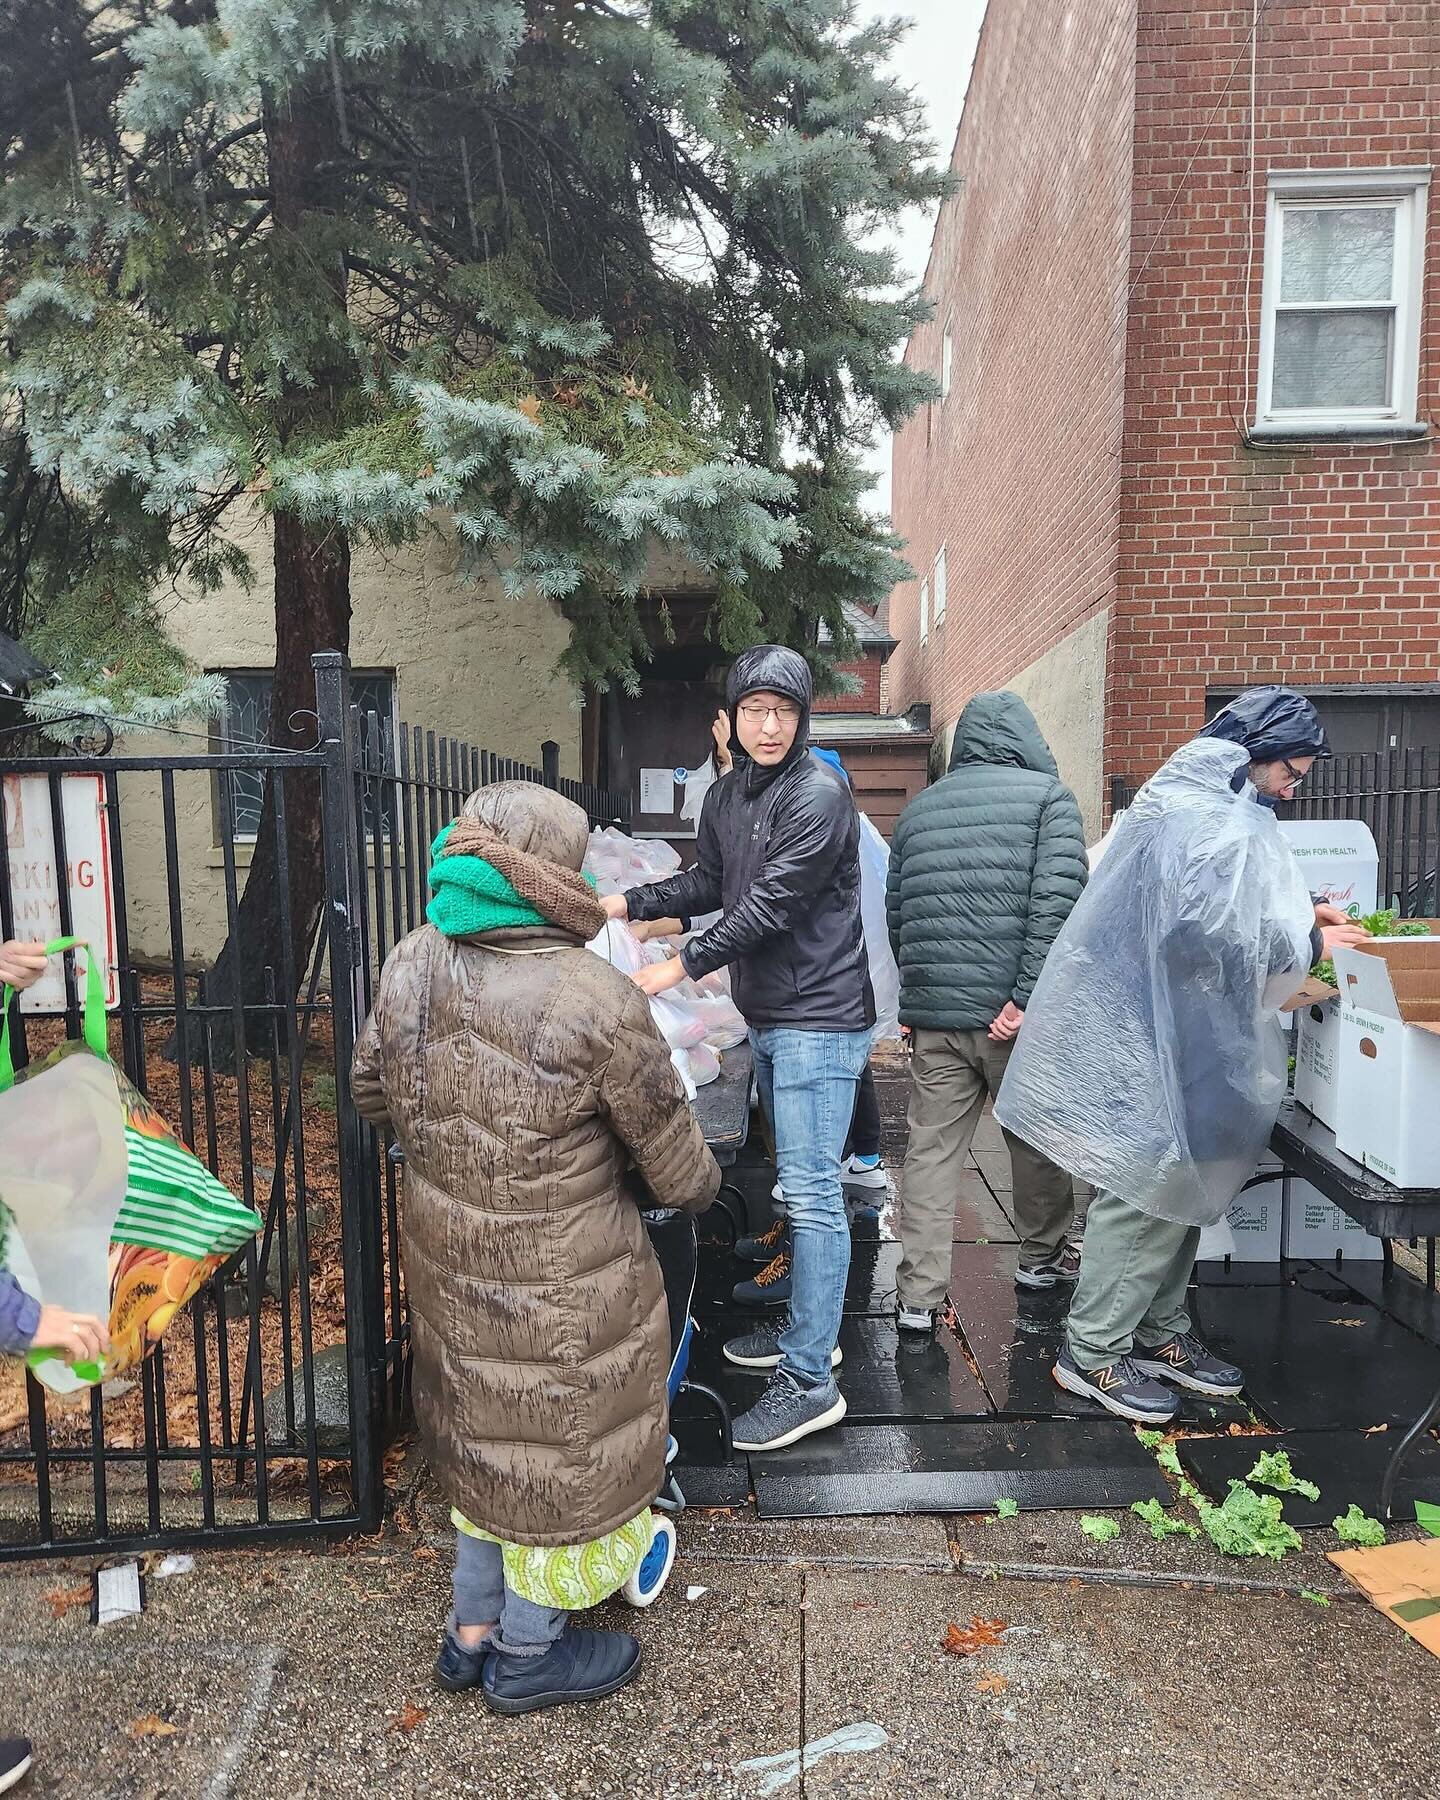 #throwback to a rainy pantry day last month! Come serve our neighbors together this Saturday Feb 10th as we package and distribute groceries at Stacey&rsquo;s Pantry.